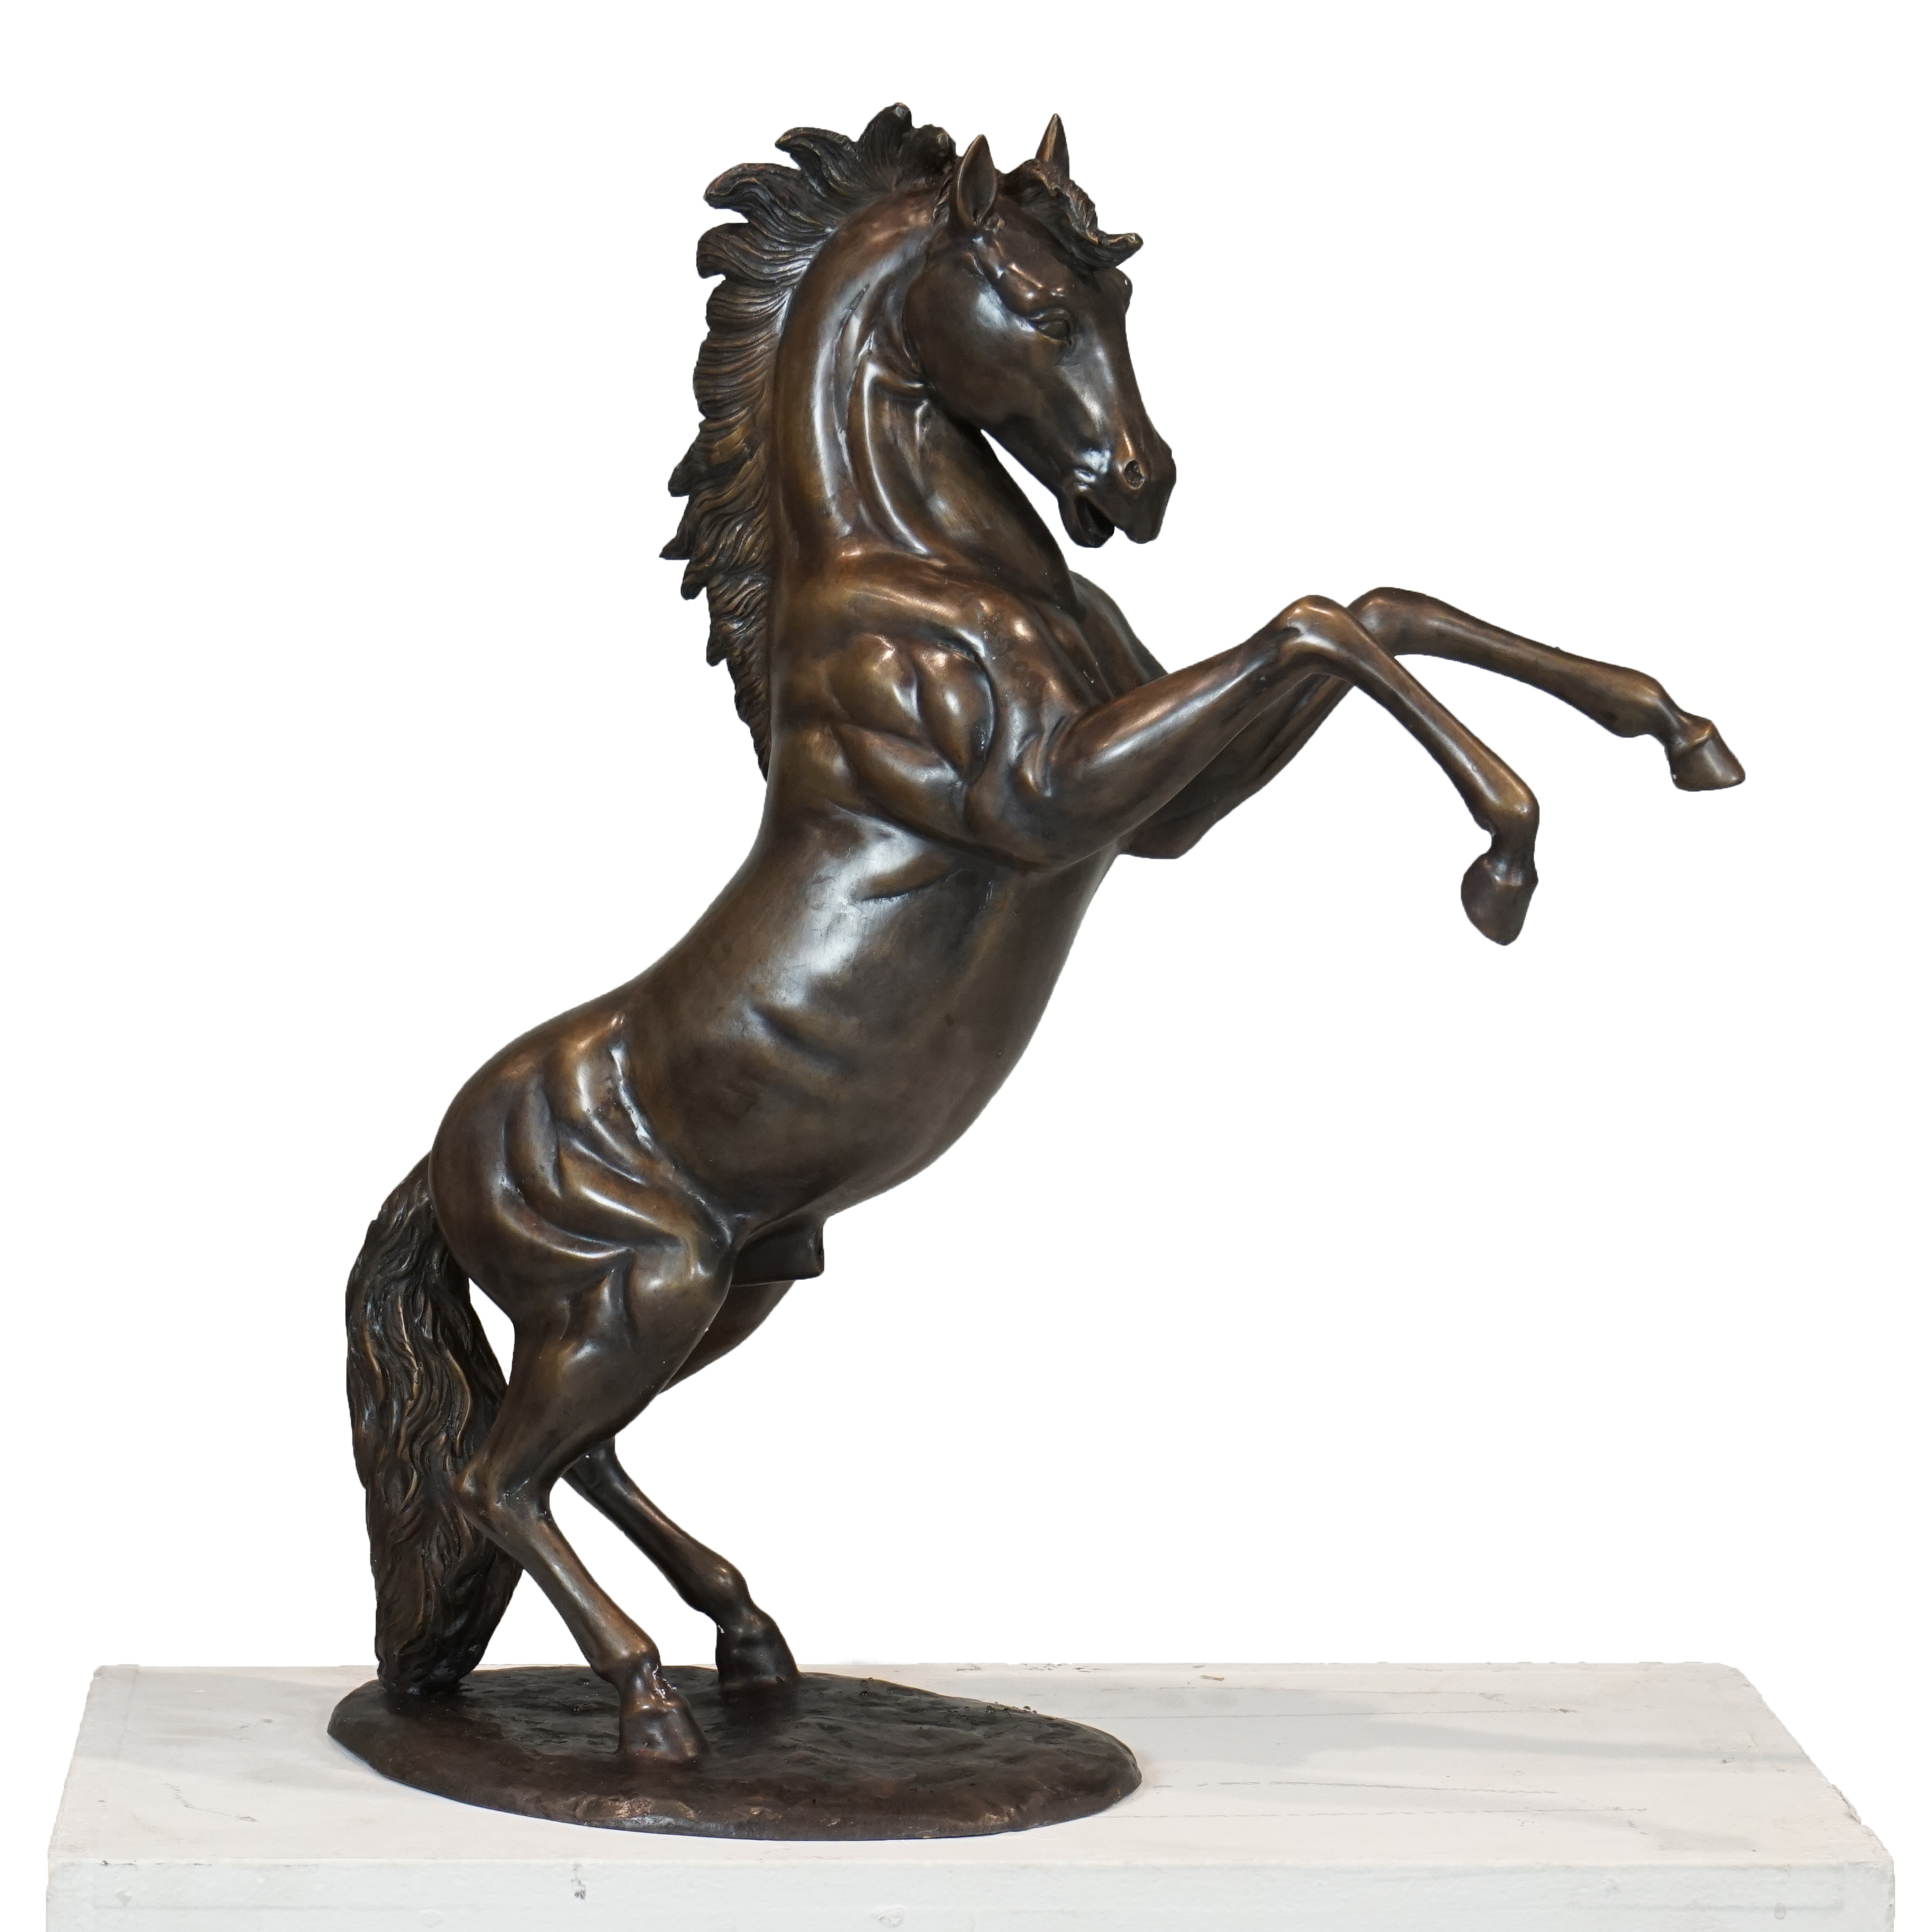 Small Rearing Horse Statue - IronGate Garden Elements